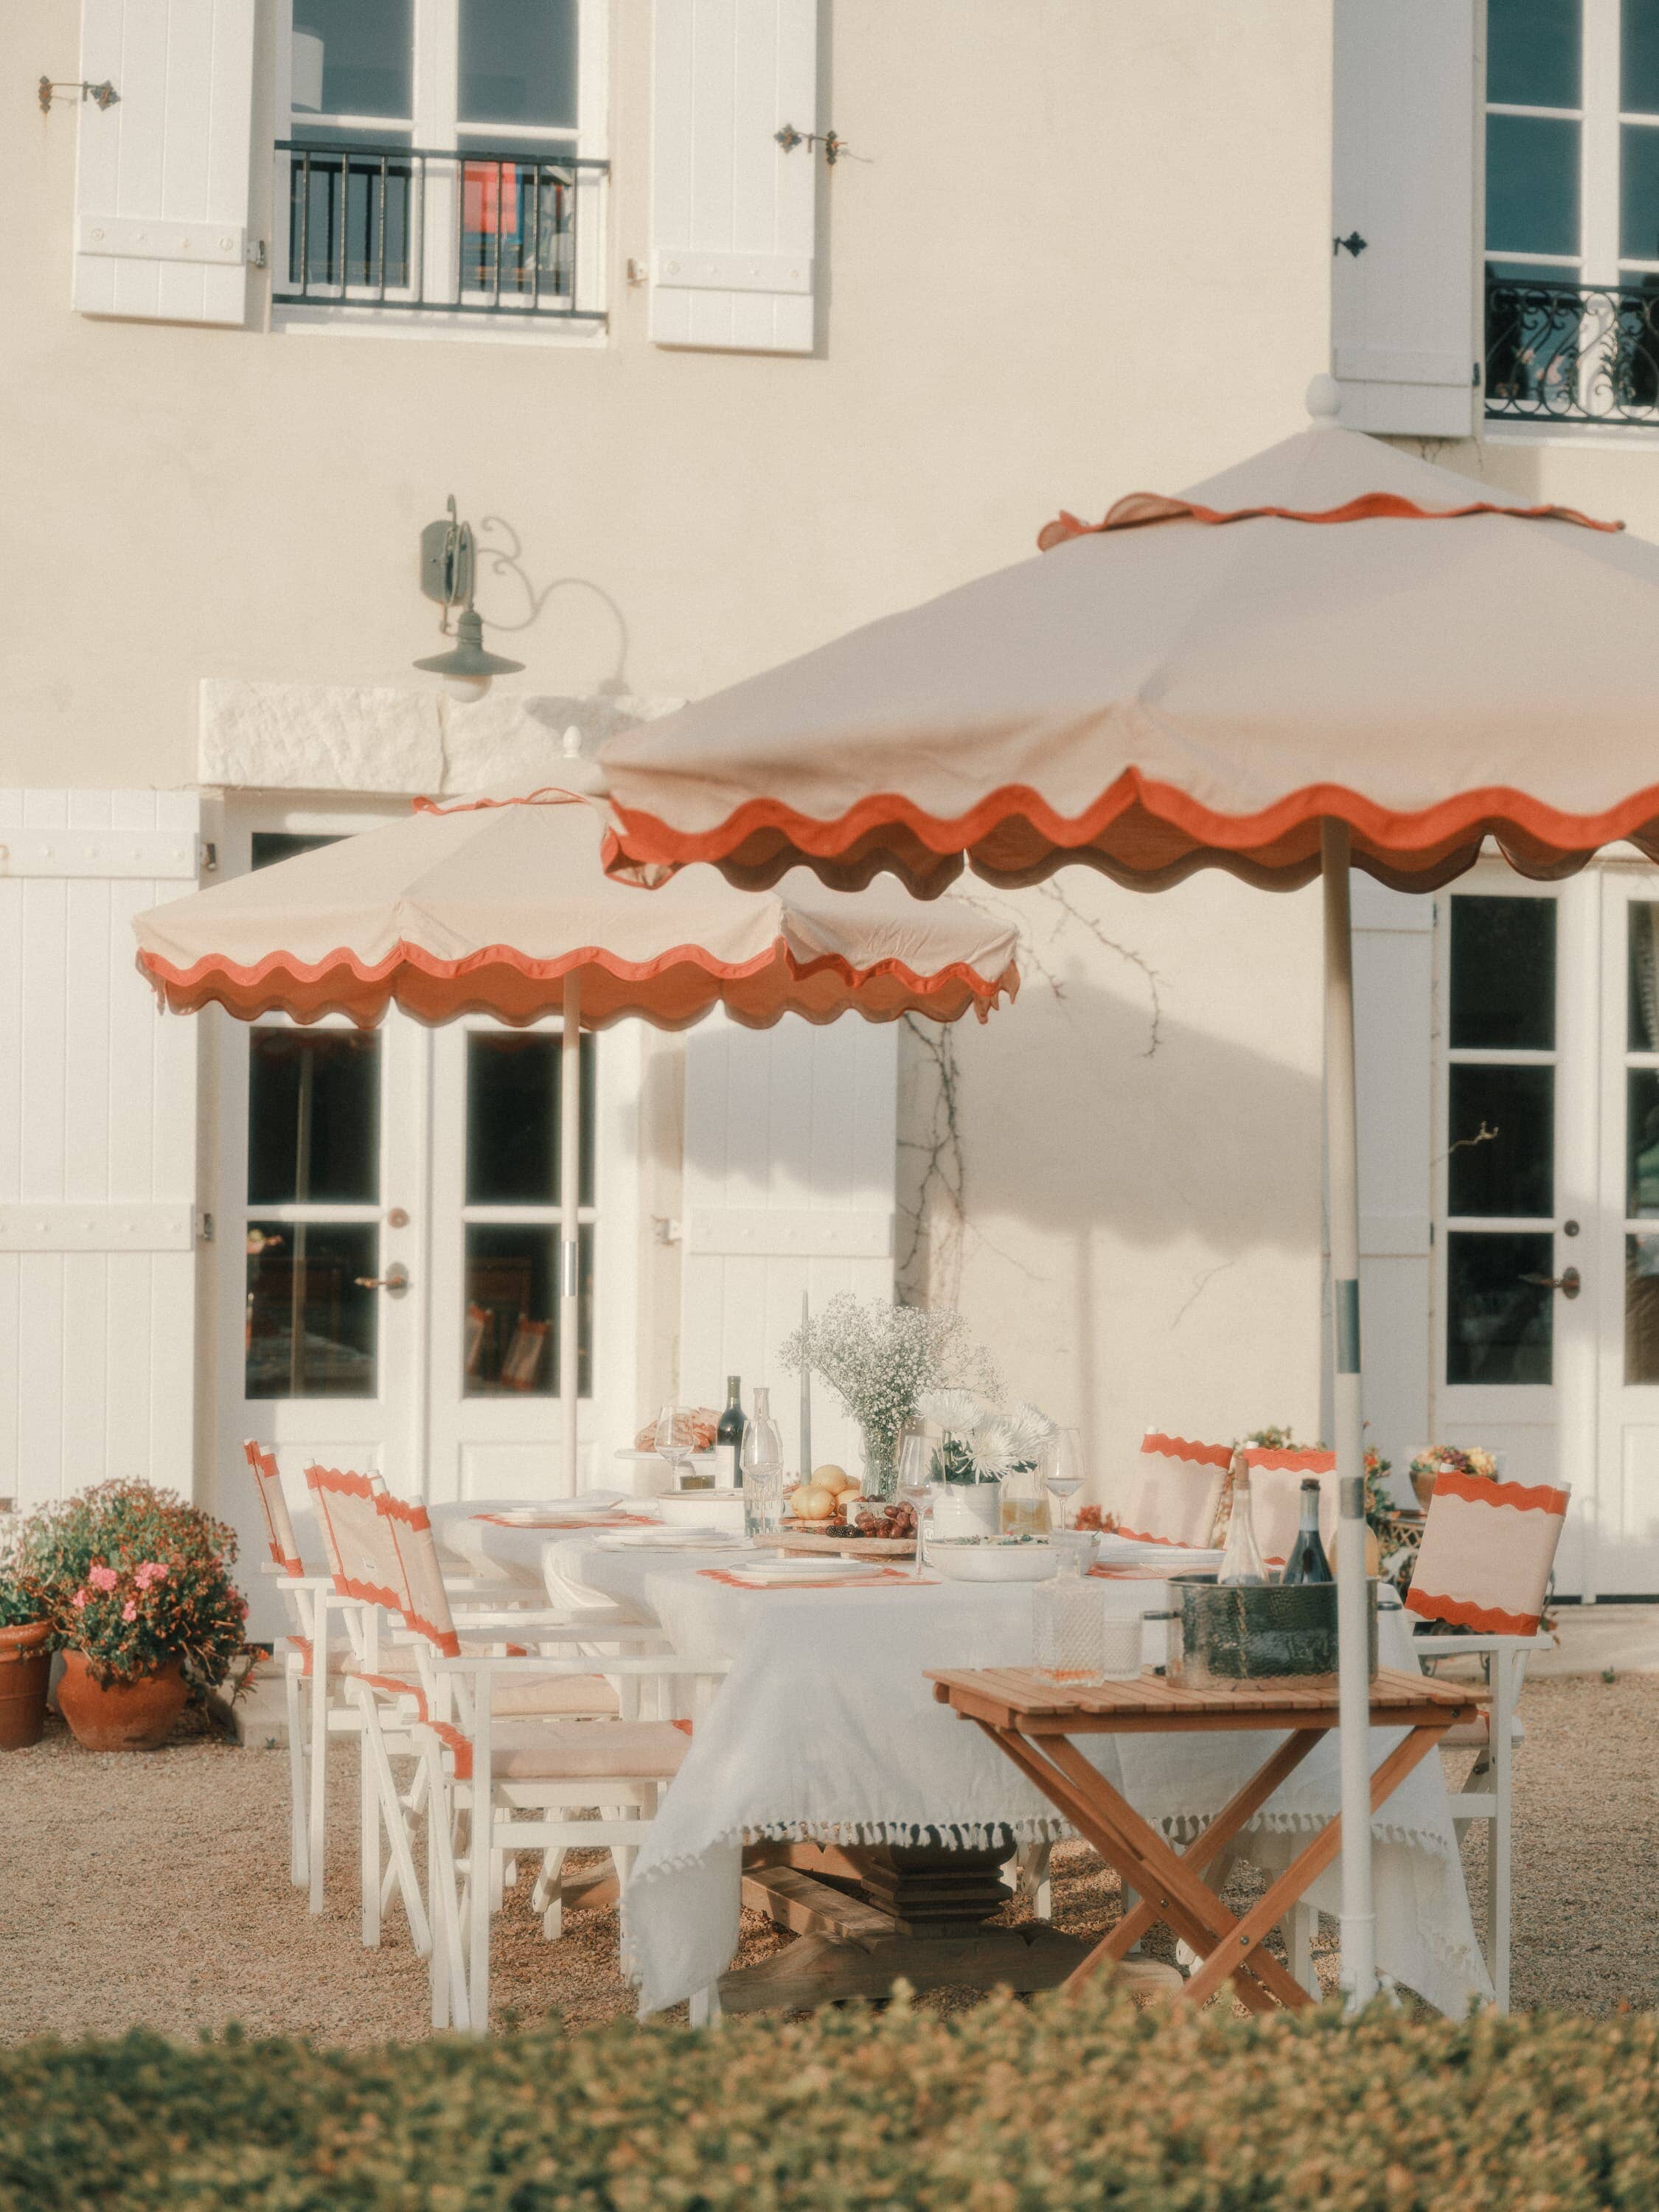 Outdoor patio setting with riviera pink market umbrellas, chairs and white table